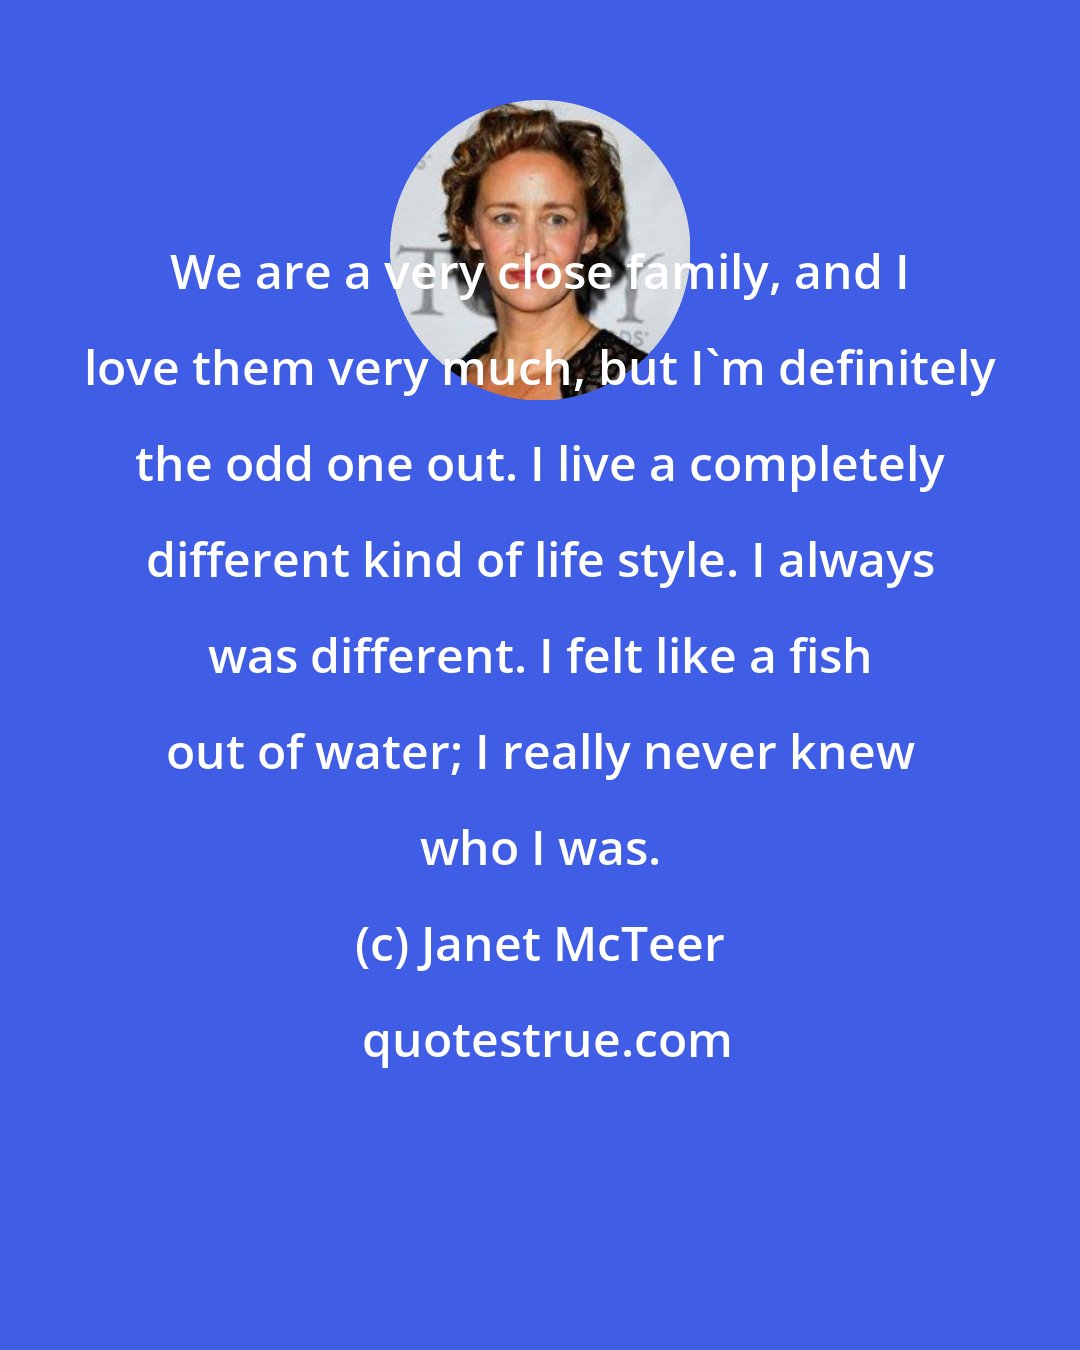 Janet McTeer: We are a very close family, and I love them very much, but I'm definitely the odd one out. I live a completely different kind of life style. I always was different. I felt like a fish out of water; I really never knew who I was.